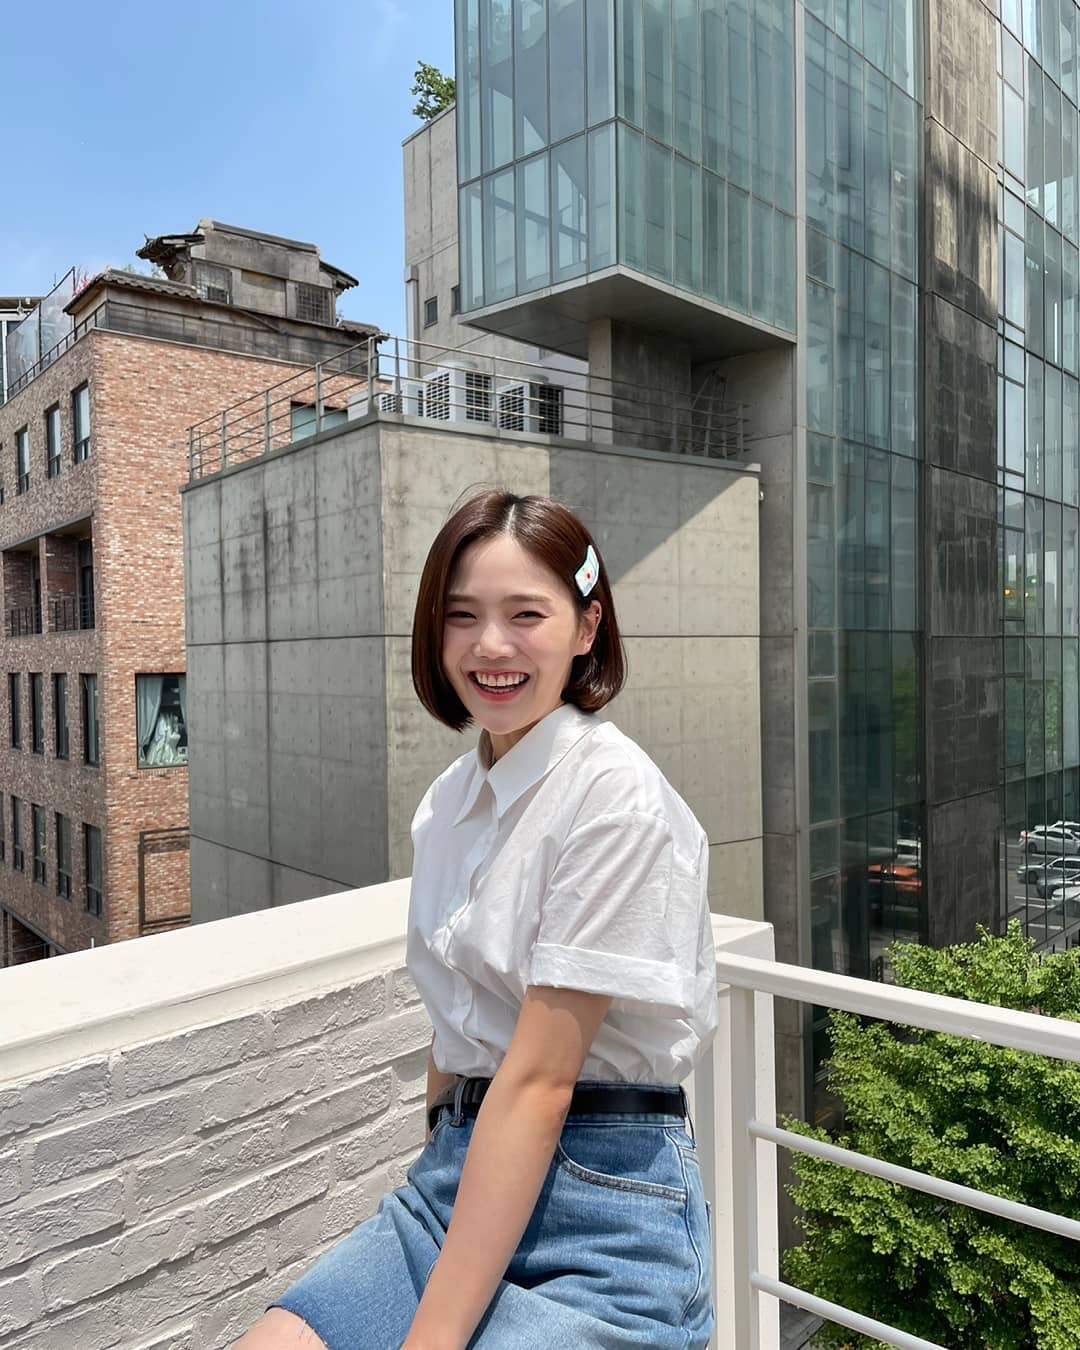 OH MY GIRL Hyojung, lovely short-haired goddess.. Her beauty is as clear as the weather